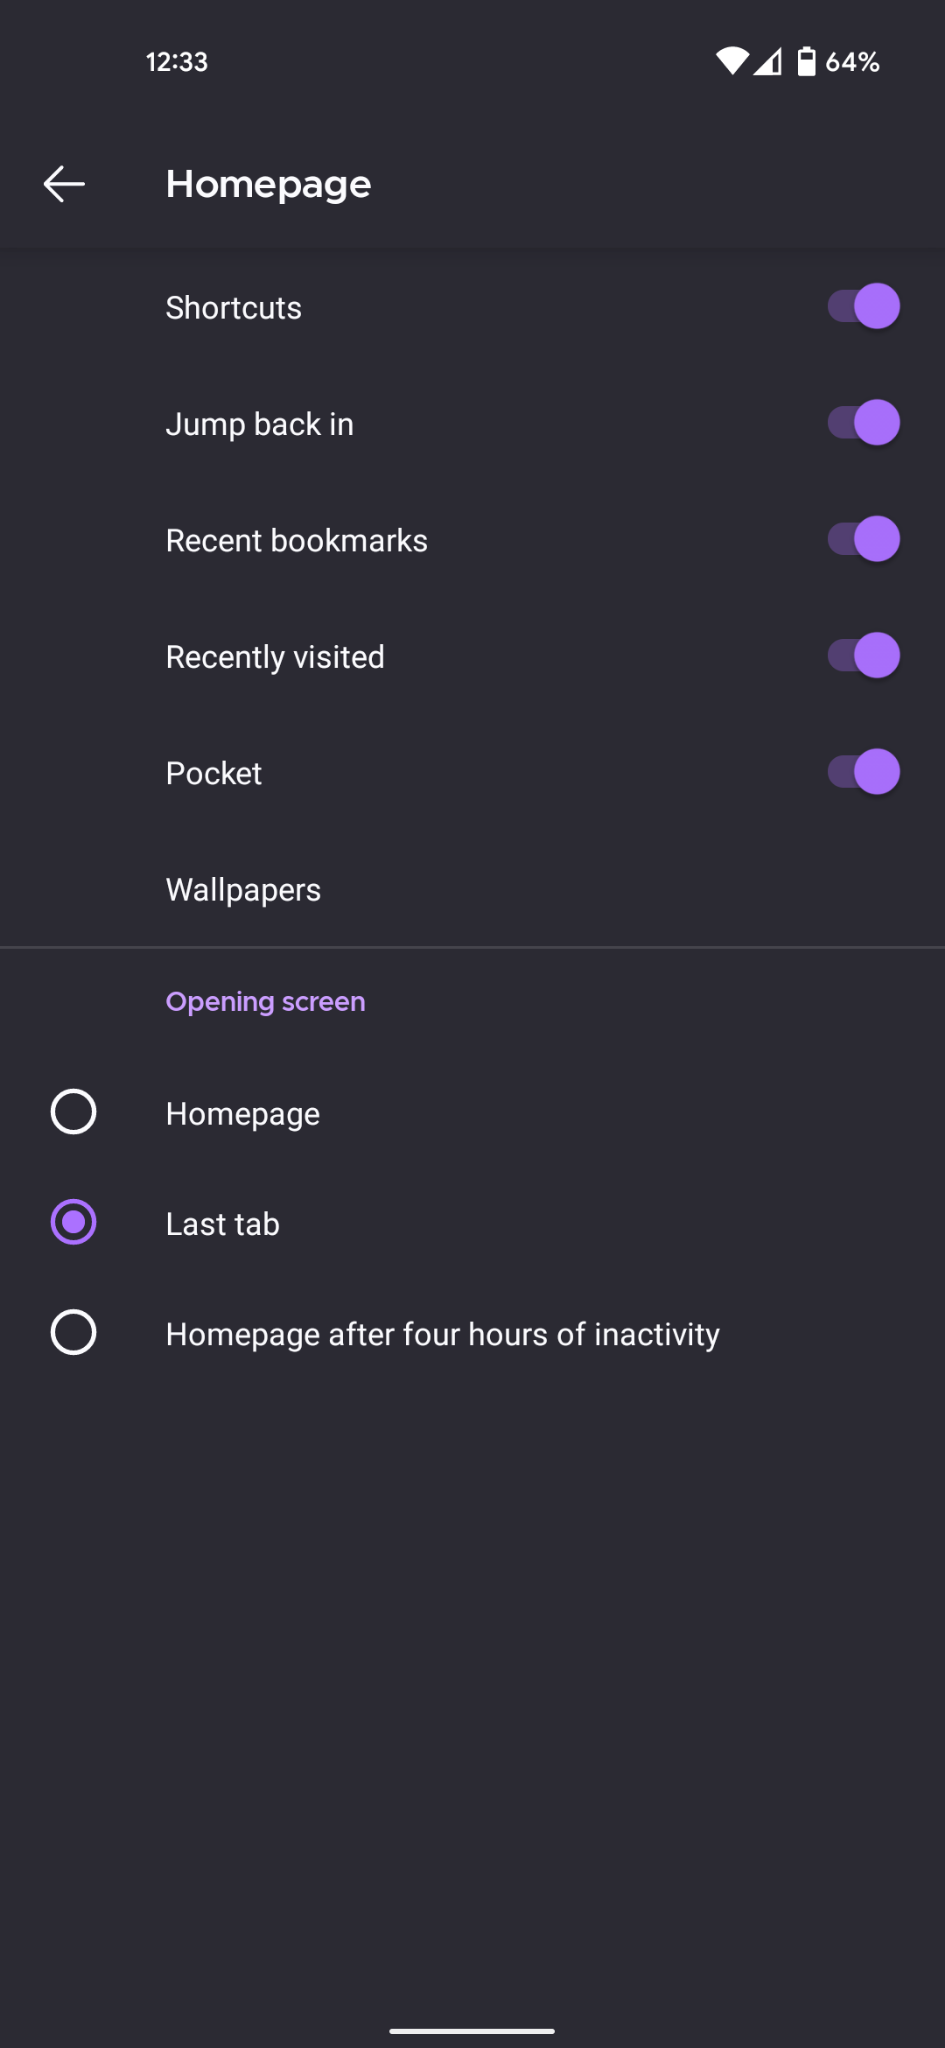 Homepage settings for Firefox for Android, showing the different homepage customization selections.